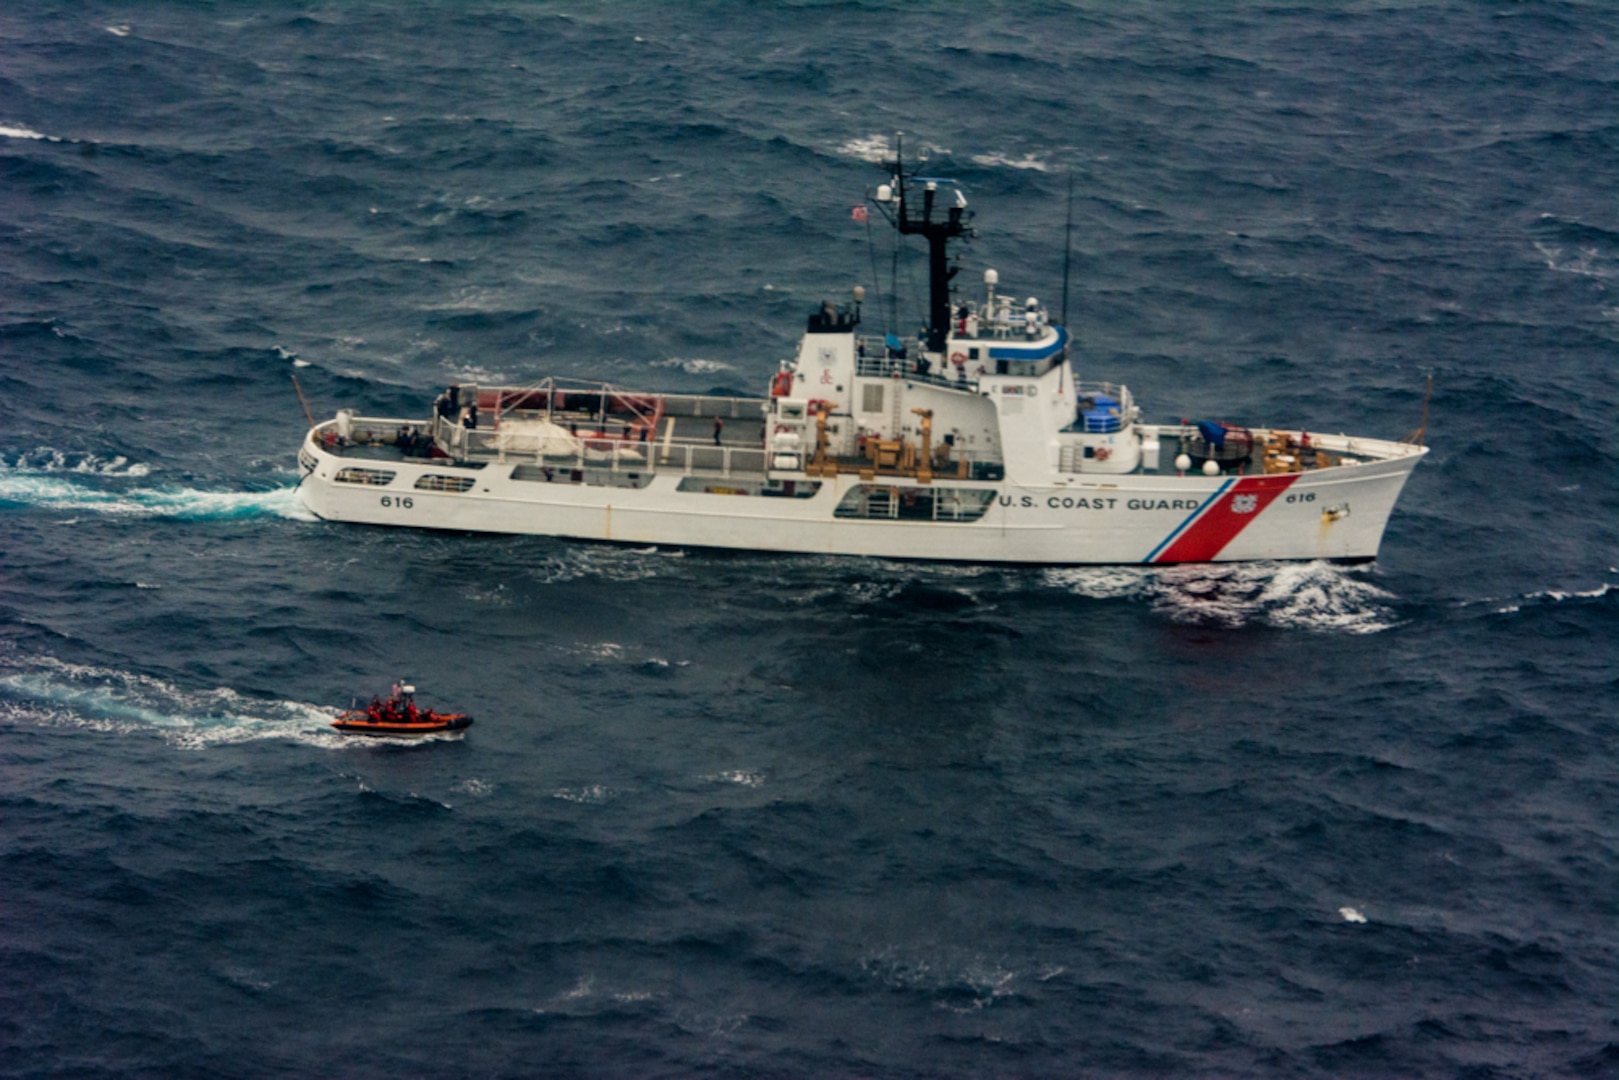 U.S. Coast Guard Cutter Diligence sits in the water off of the coast of Key West, Fla., waiting to receive a search and rescue bundle on Jan. 22, 2016. The U.S. Coast Guard assisted the 139th Airlift Wing with Operation Jesse Relief, a joint search and rescue exercise. (U.S. Air National Guard photo by Senior Airman Sheldon Thompson)